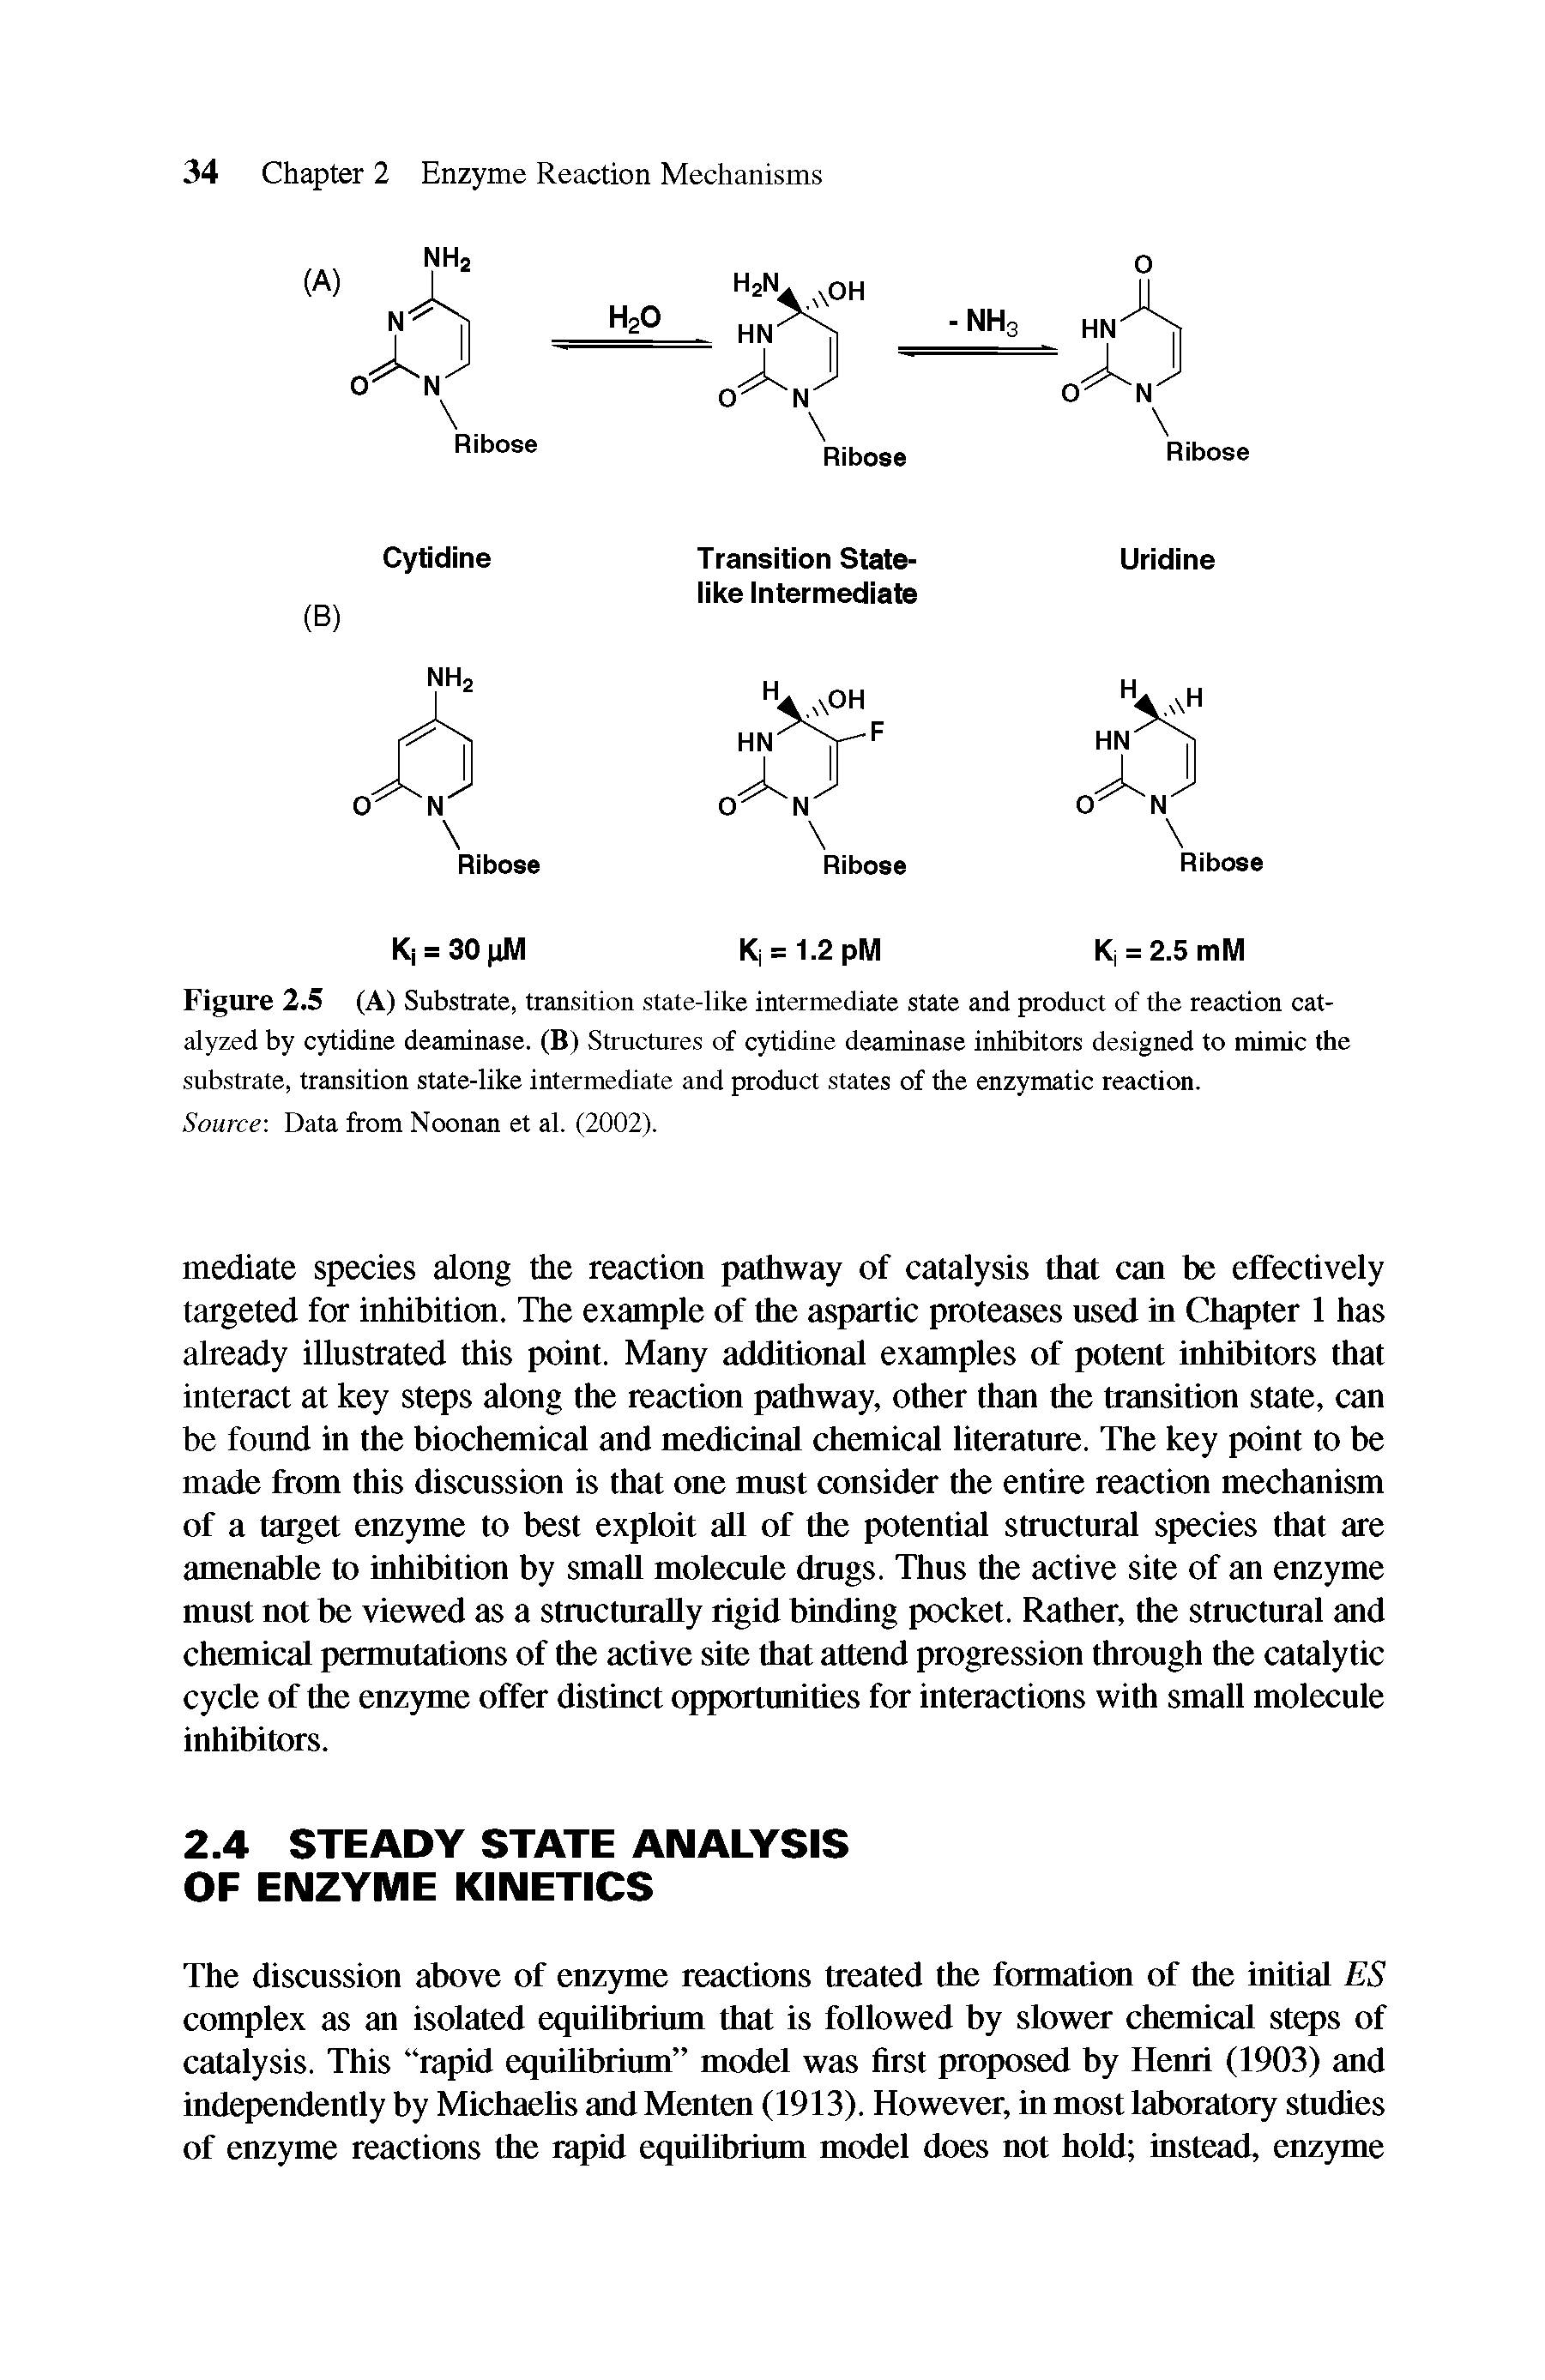 Figure 2.5 (A) Substrate, transition state-like intermediate state and product of the reaction cat-...